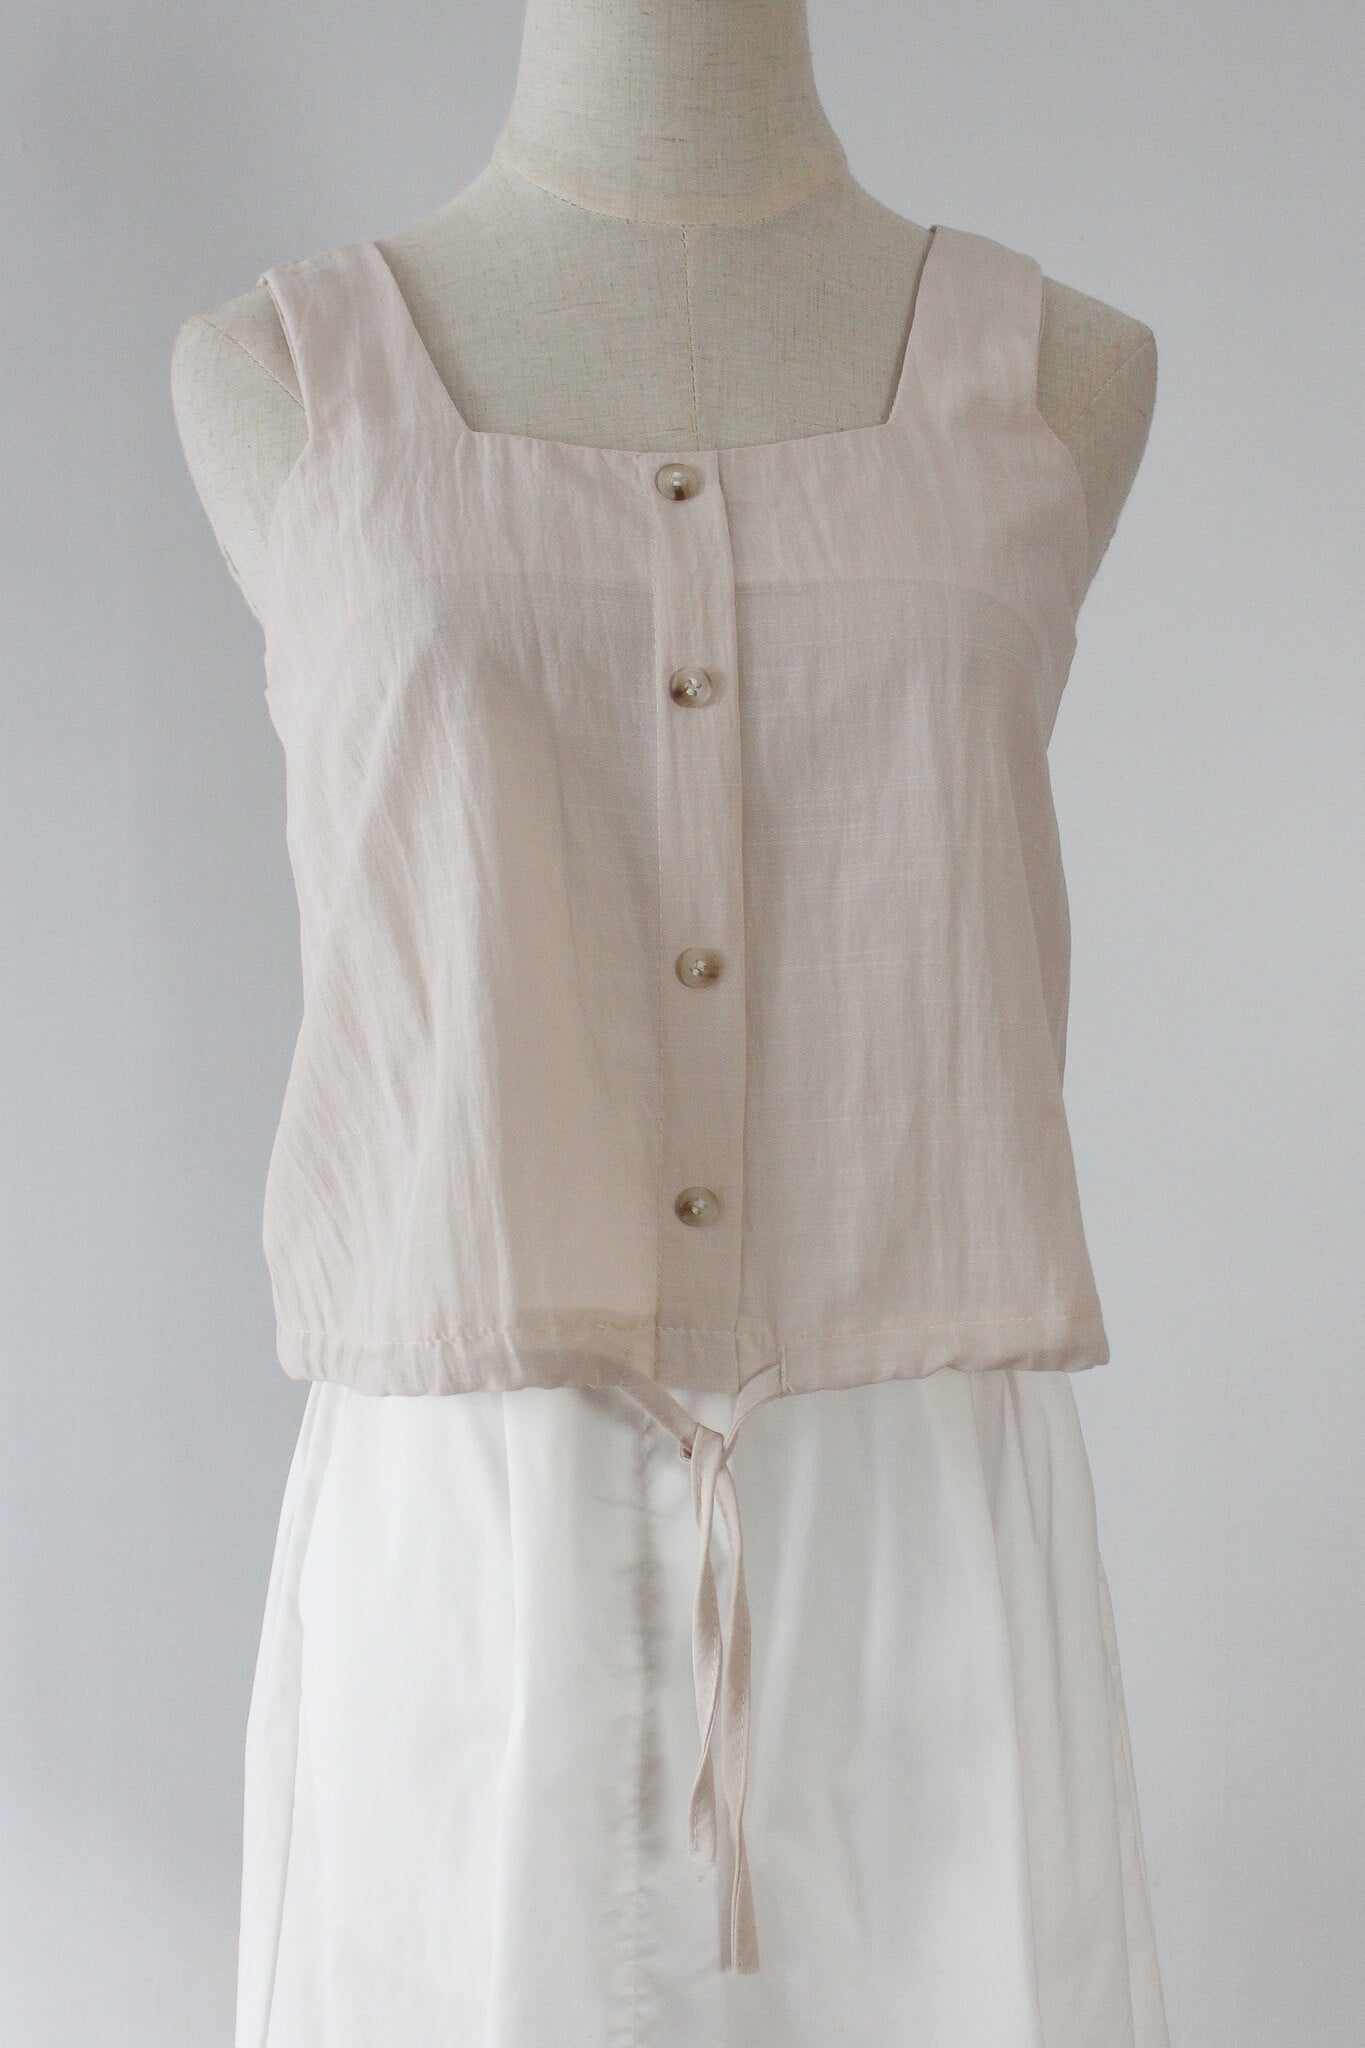 Sleeveless Drawstring Cropped Top with buttons